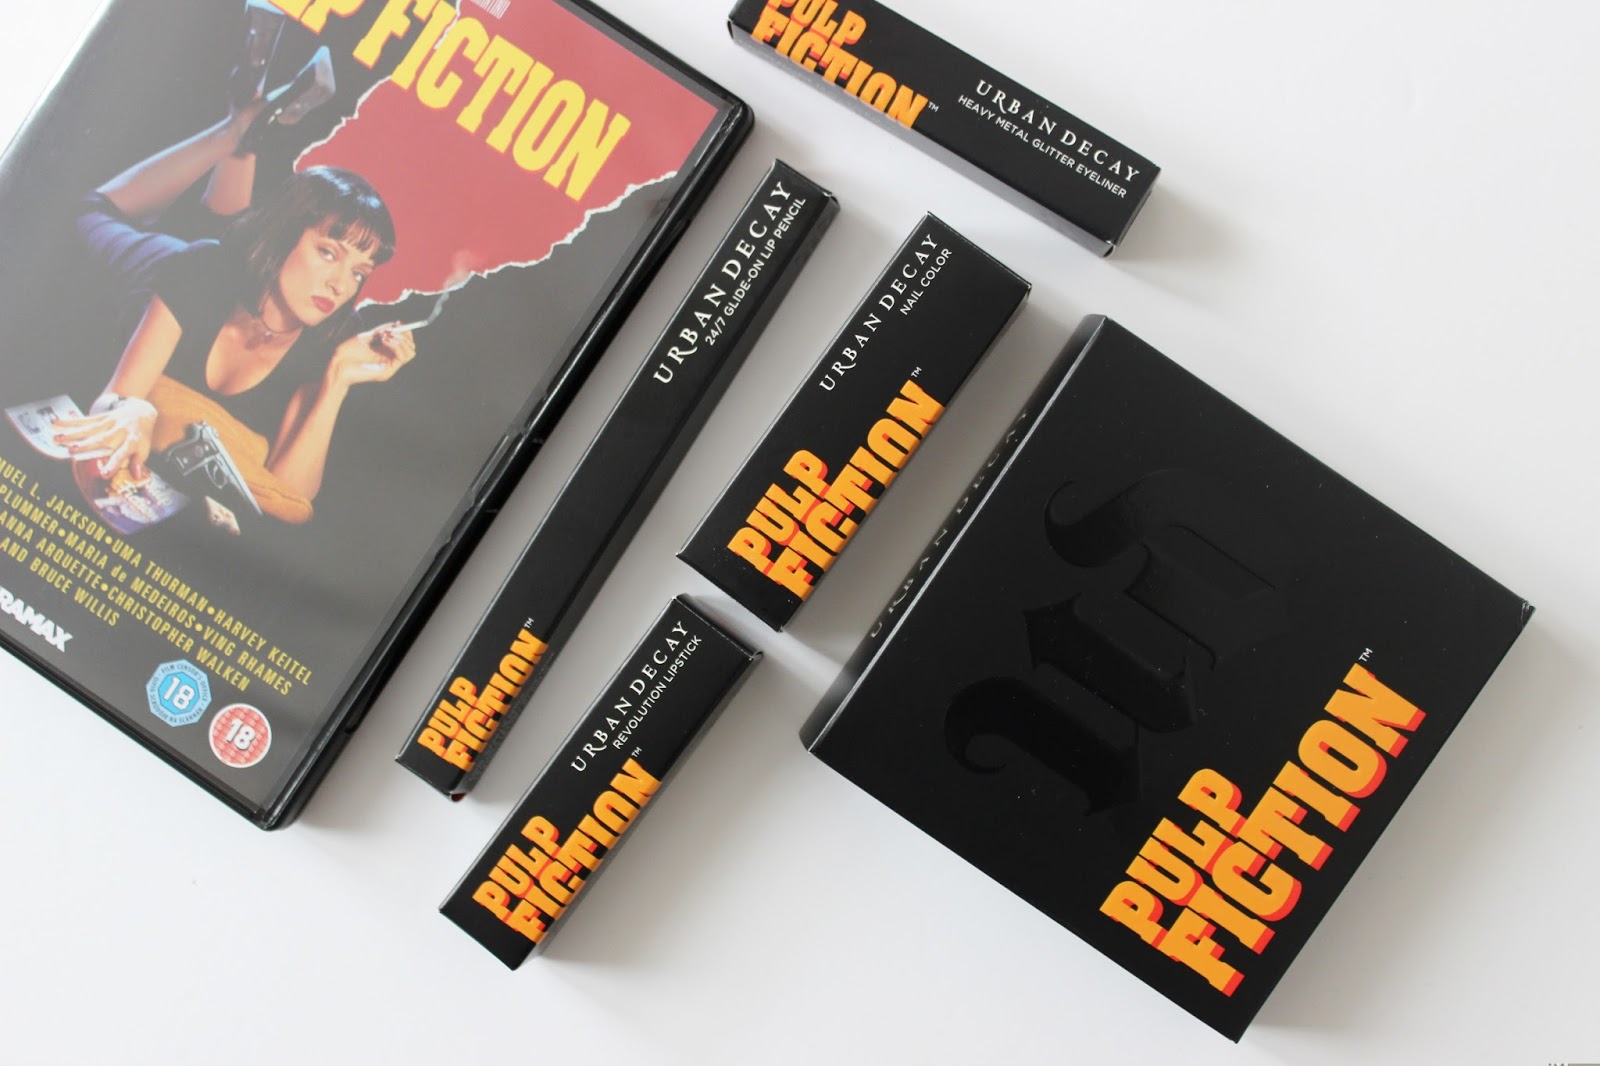 Urban Decay Pulp Fiction makeup collection